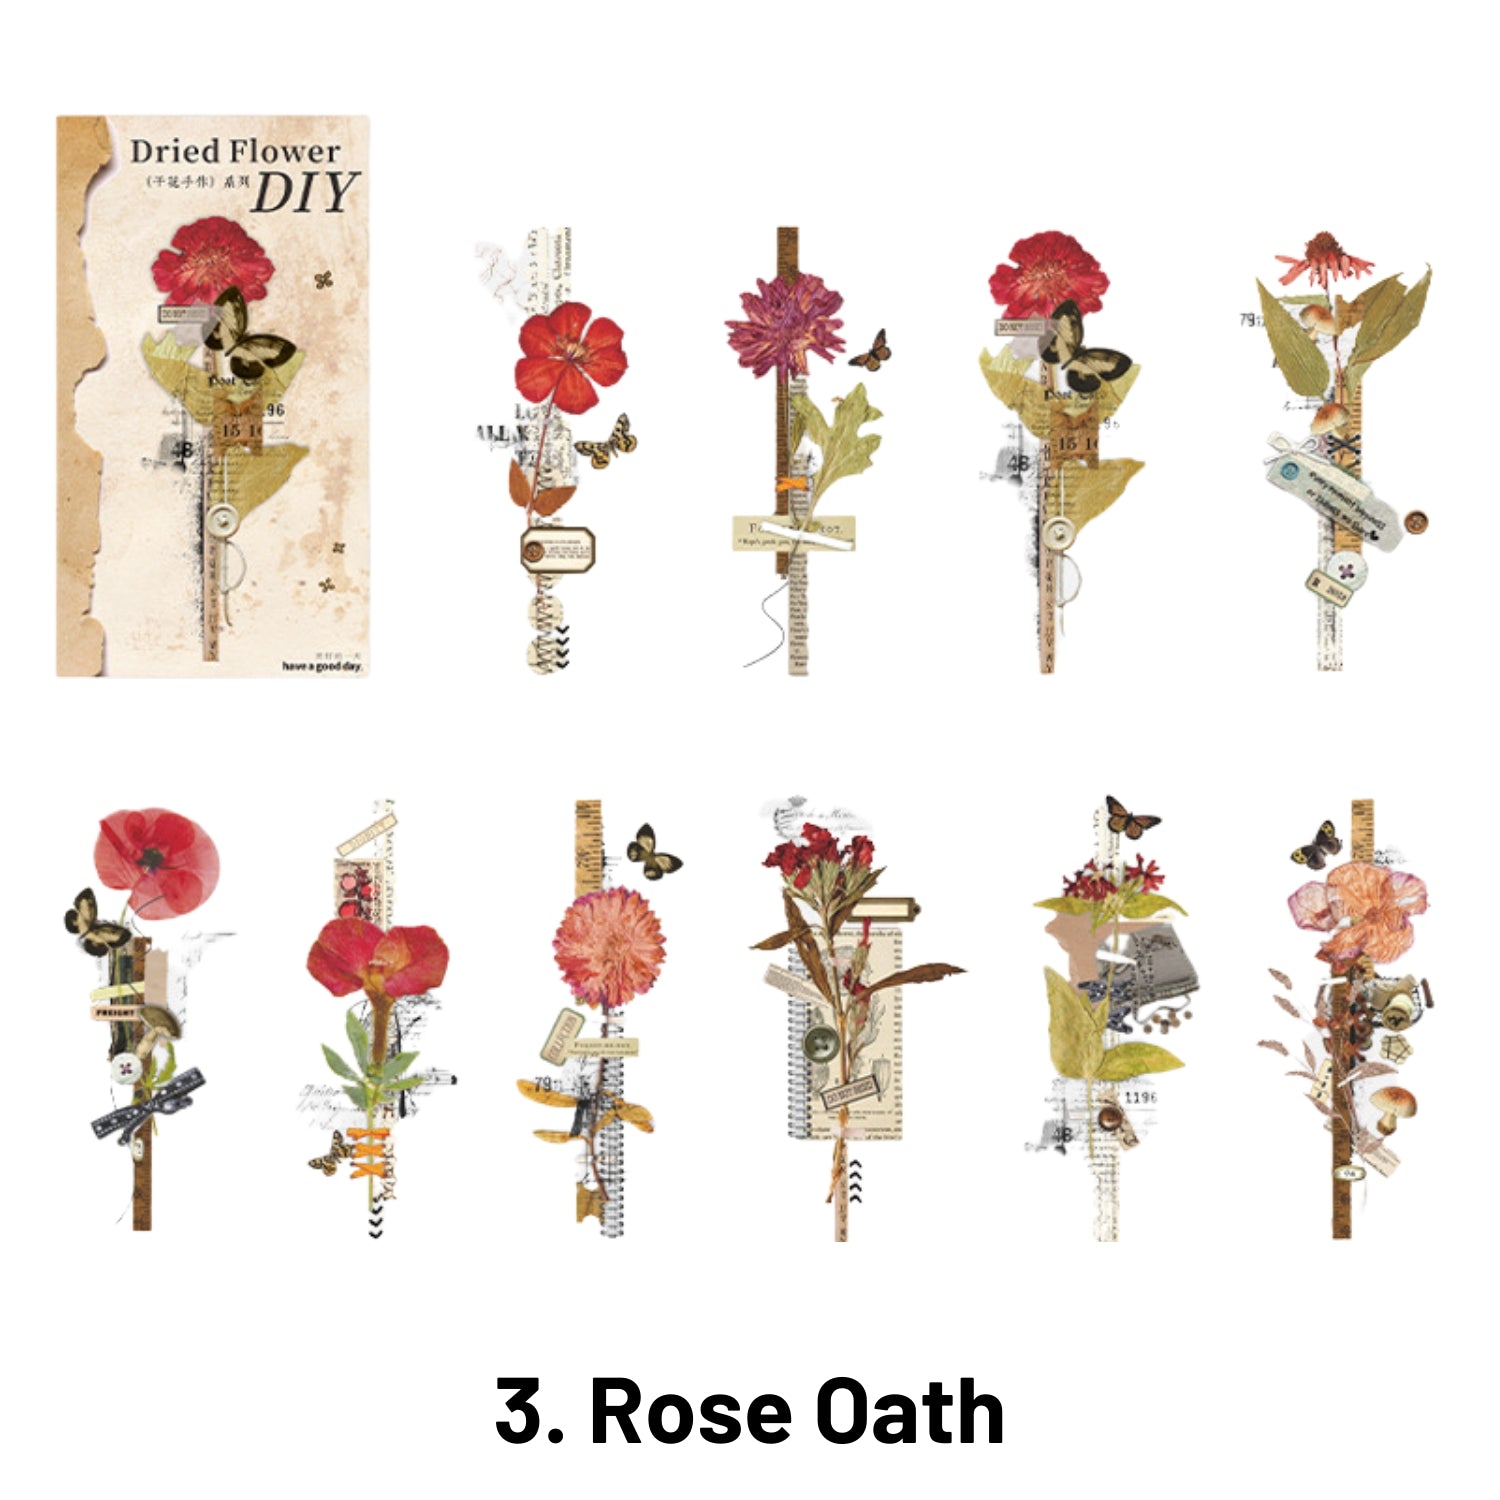 Dried Flower Handmade Series Simulated Dried Flower Material Stickers 3